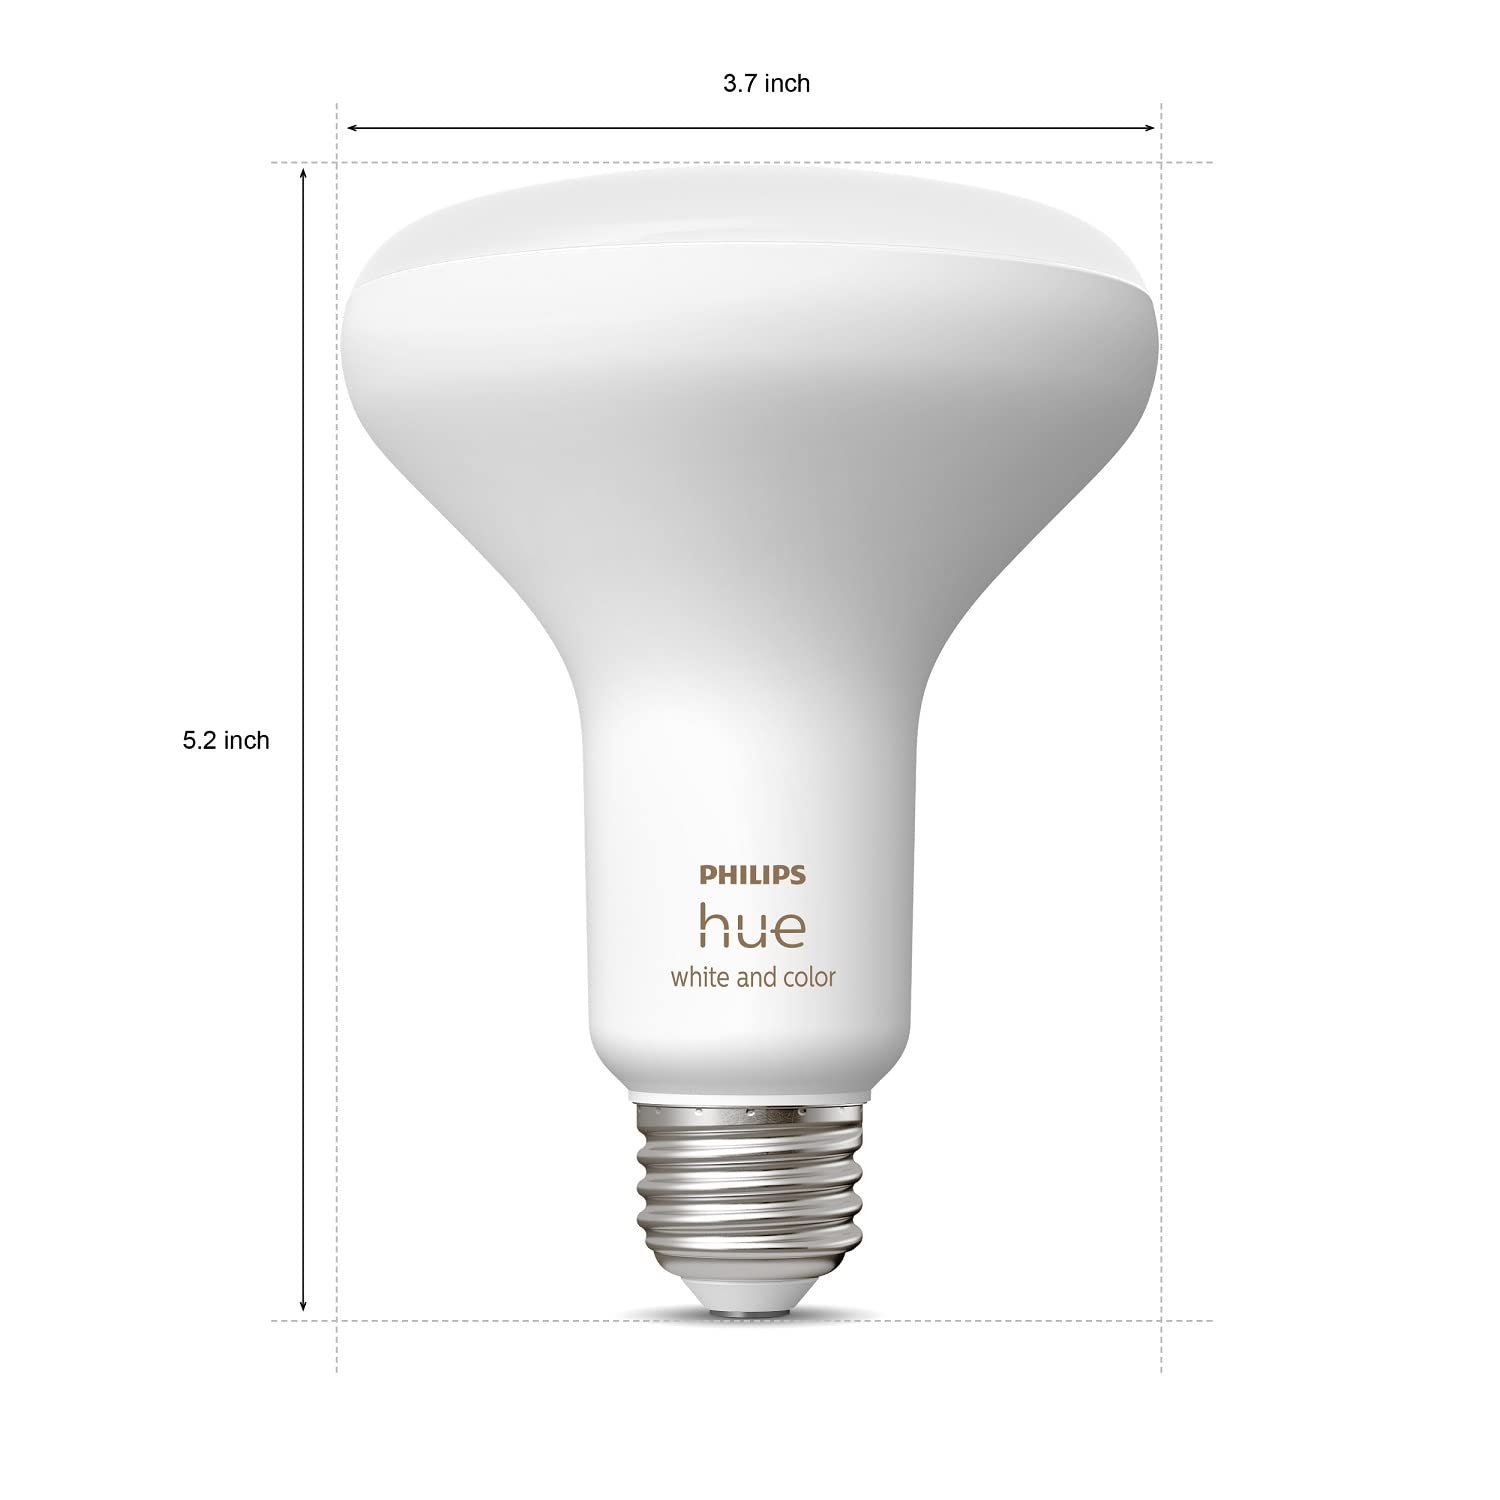 Philips Hue White & Color Ambiance BR30 LED Smart Bulbs, 16 Million Colors (Hue Hub Required), Compatible with Alexa, Google Assistant, and Apple HomeKit, New Version, 2 Bulbs (578096)